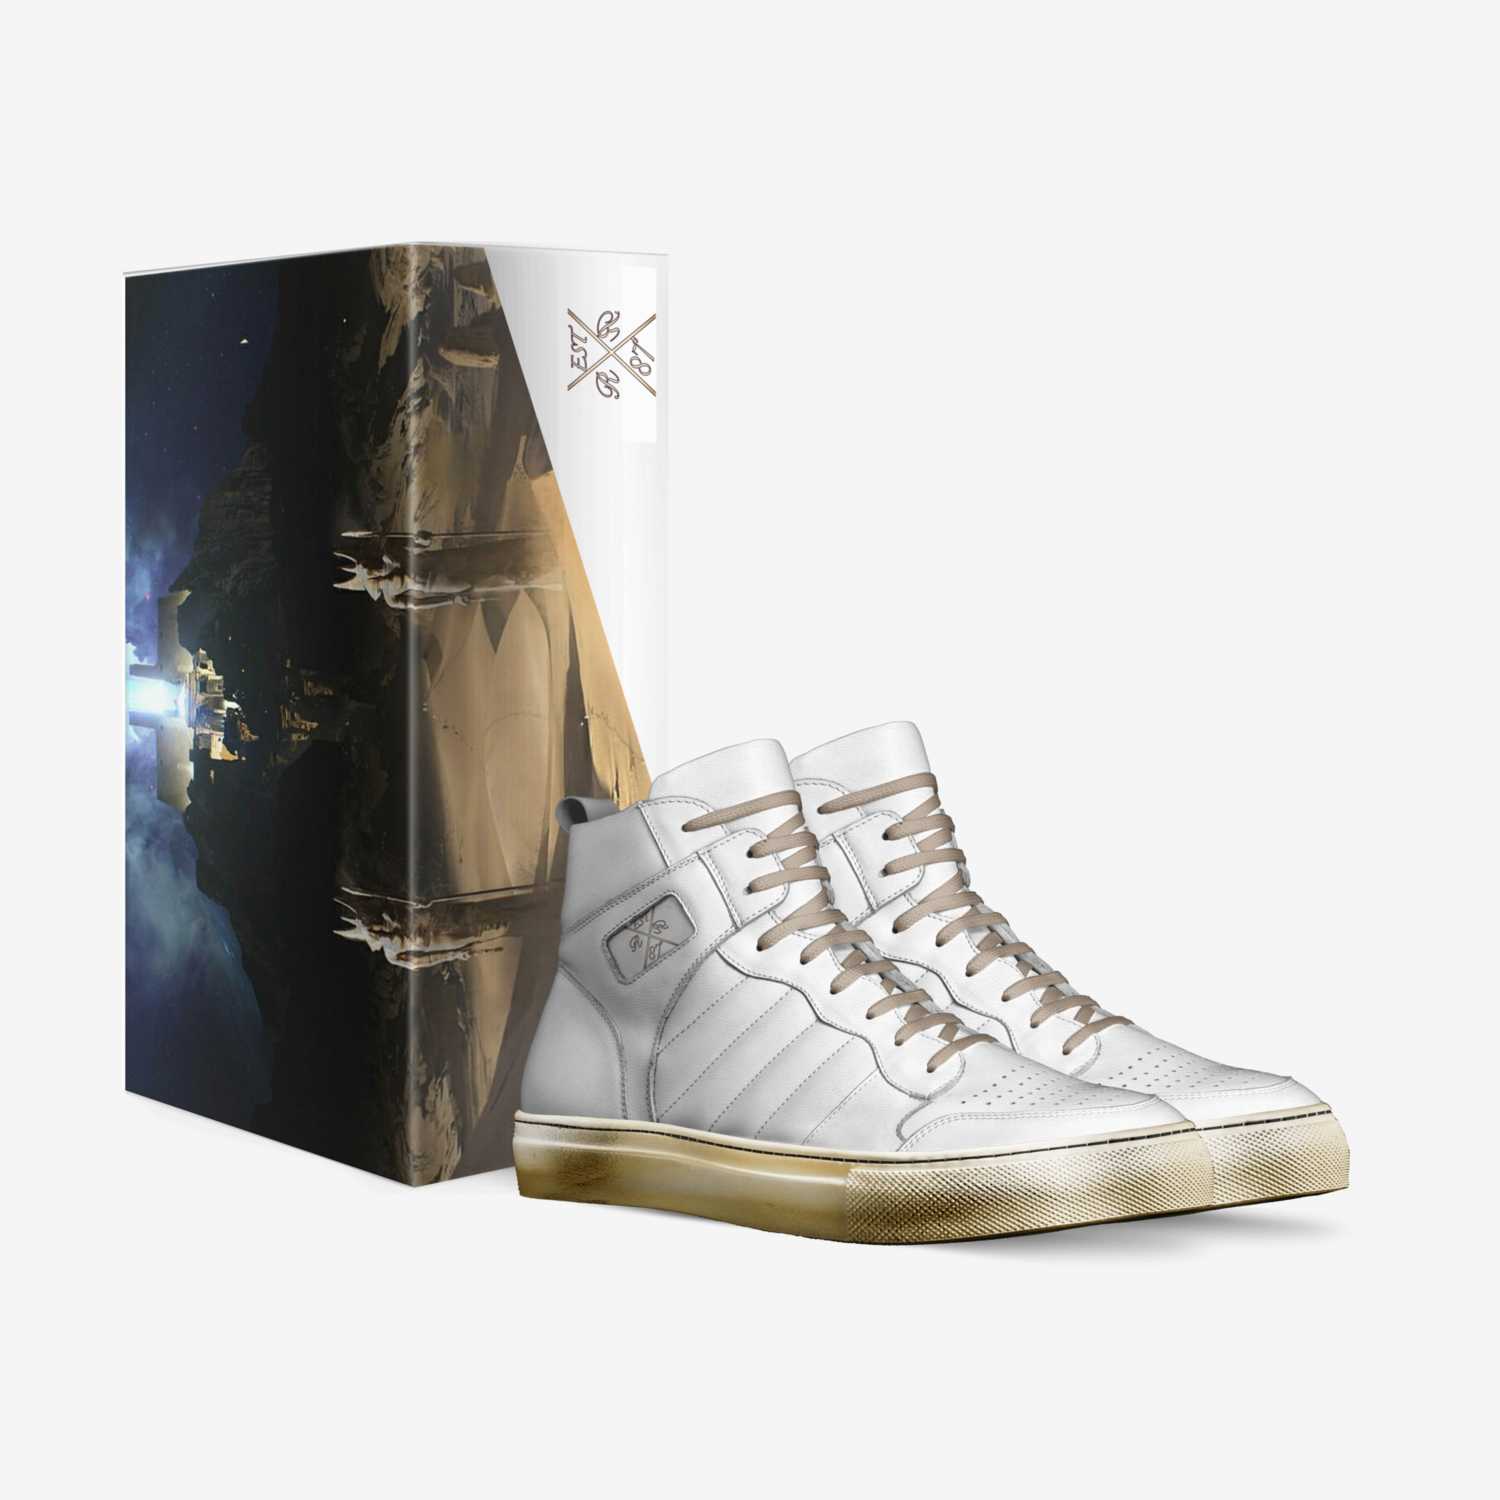 Pharaoh  custom made in Italy shoes by Raw Rebel | Box view